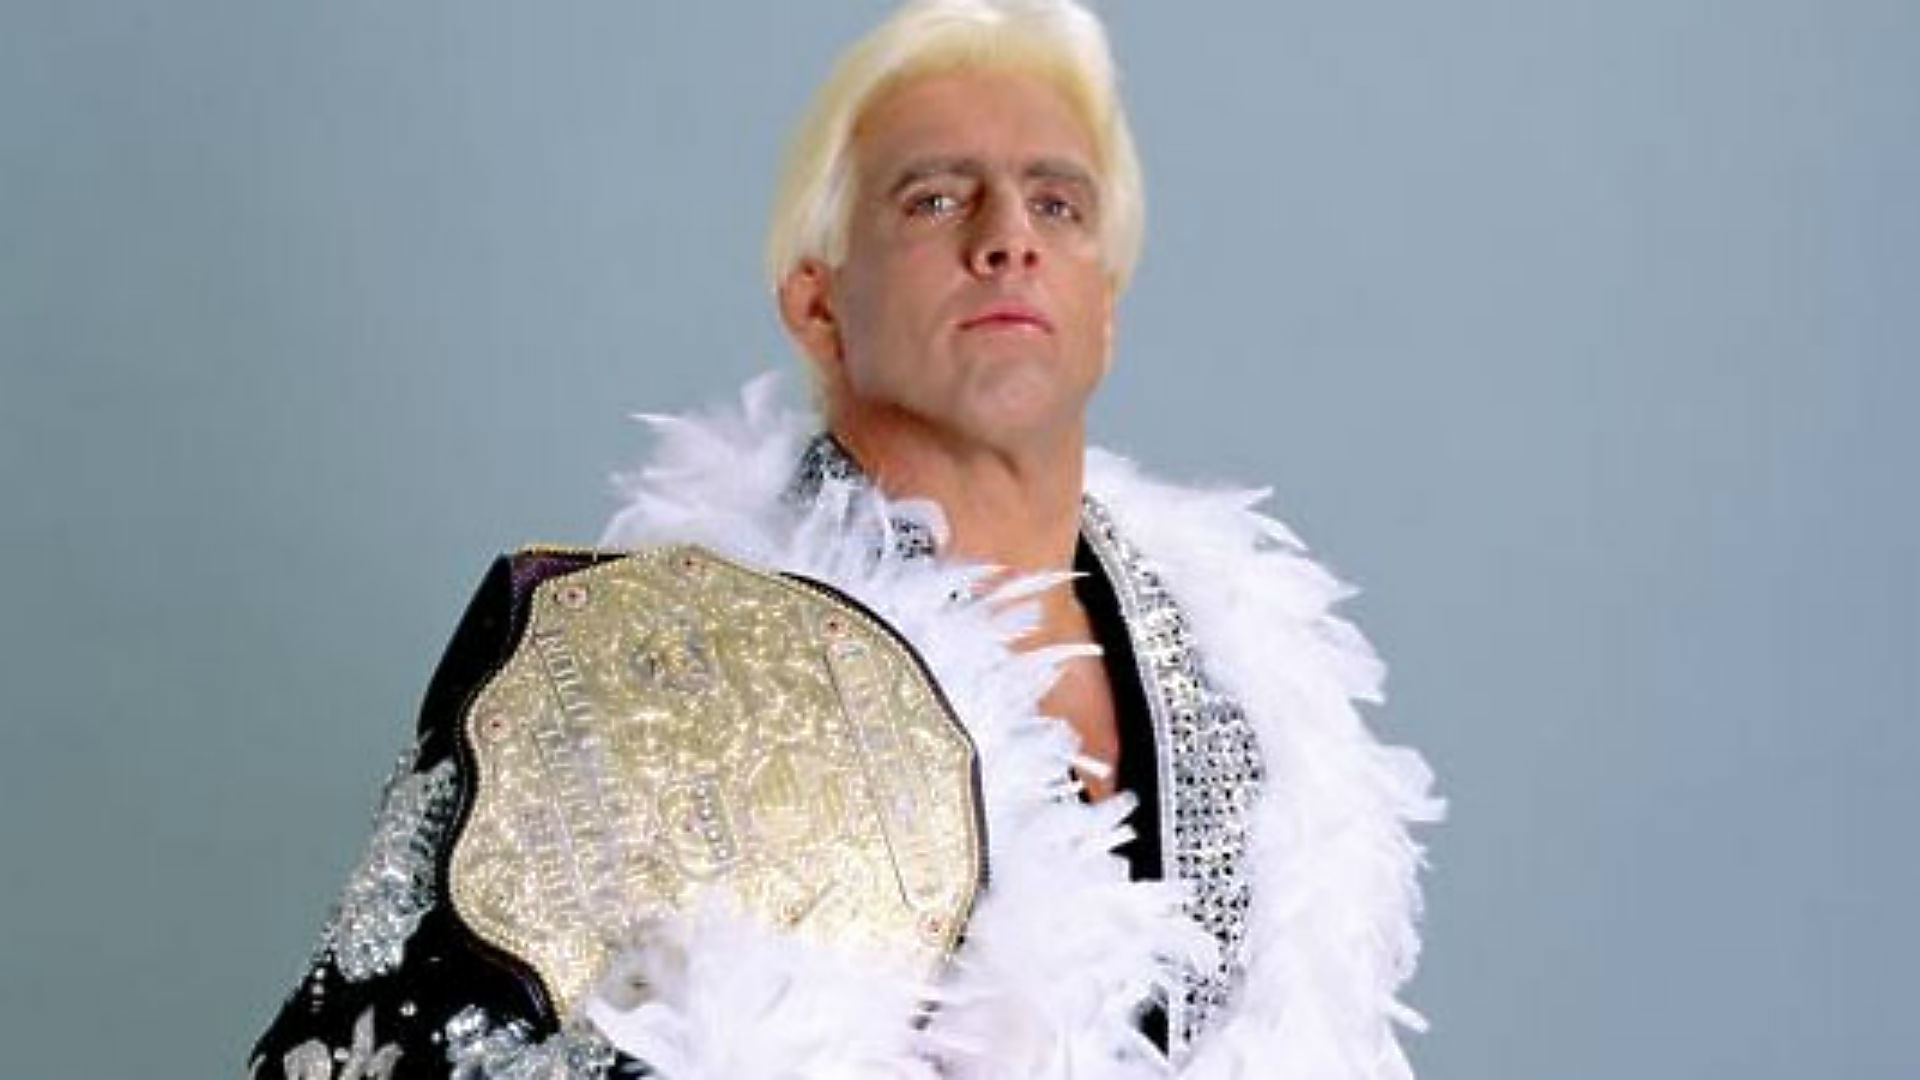 Amazing Ric Flair Pictures & Backgrounds